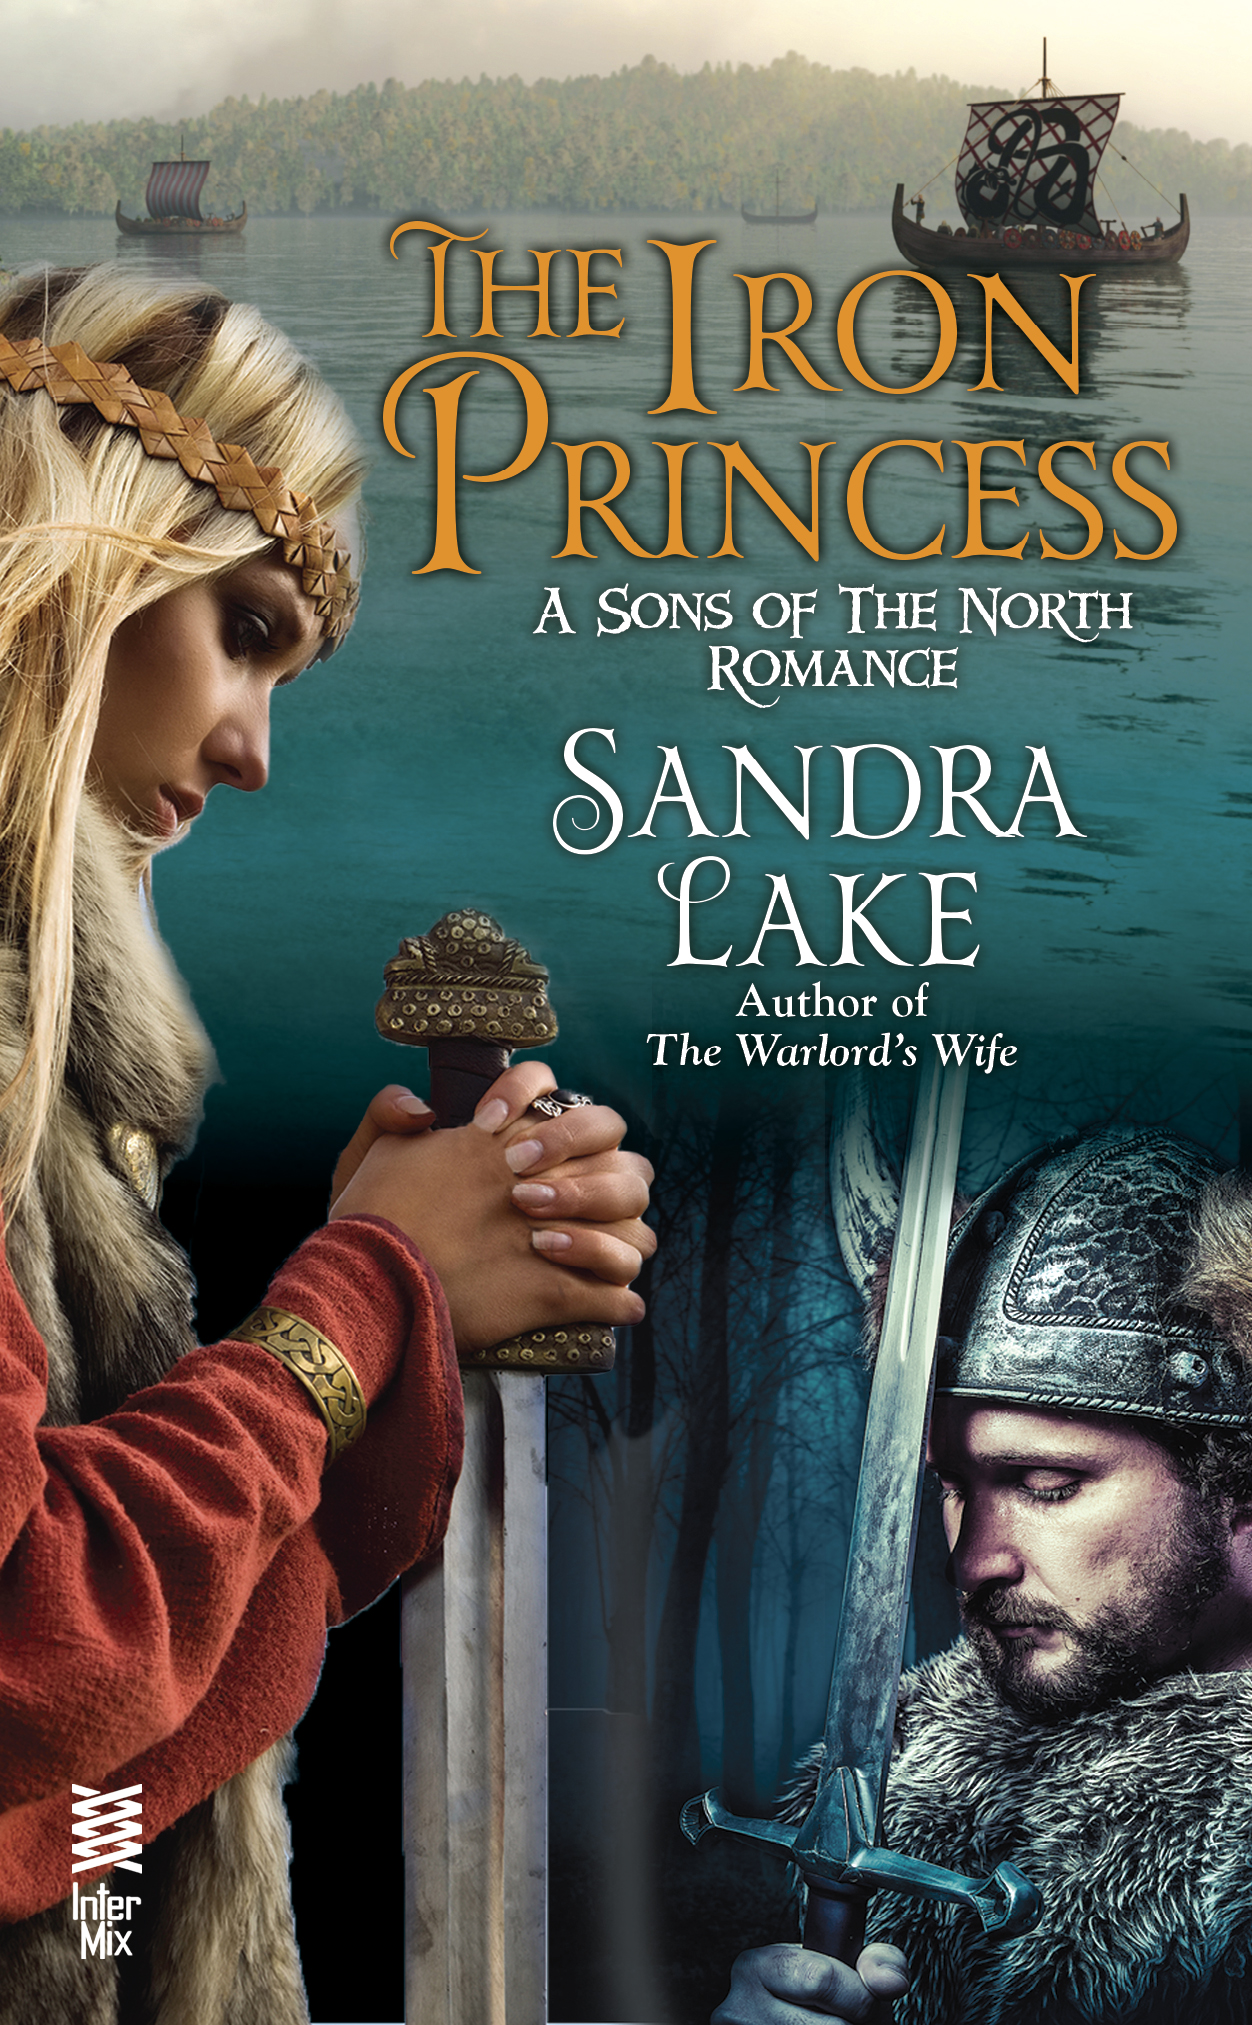 %name An epic Viking romance full of adventure, lust and deception. A must read!